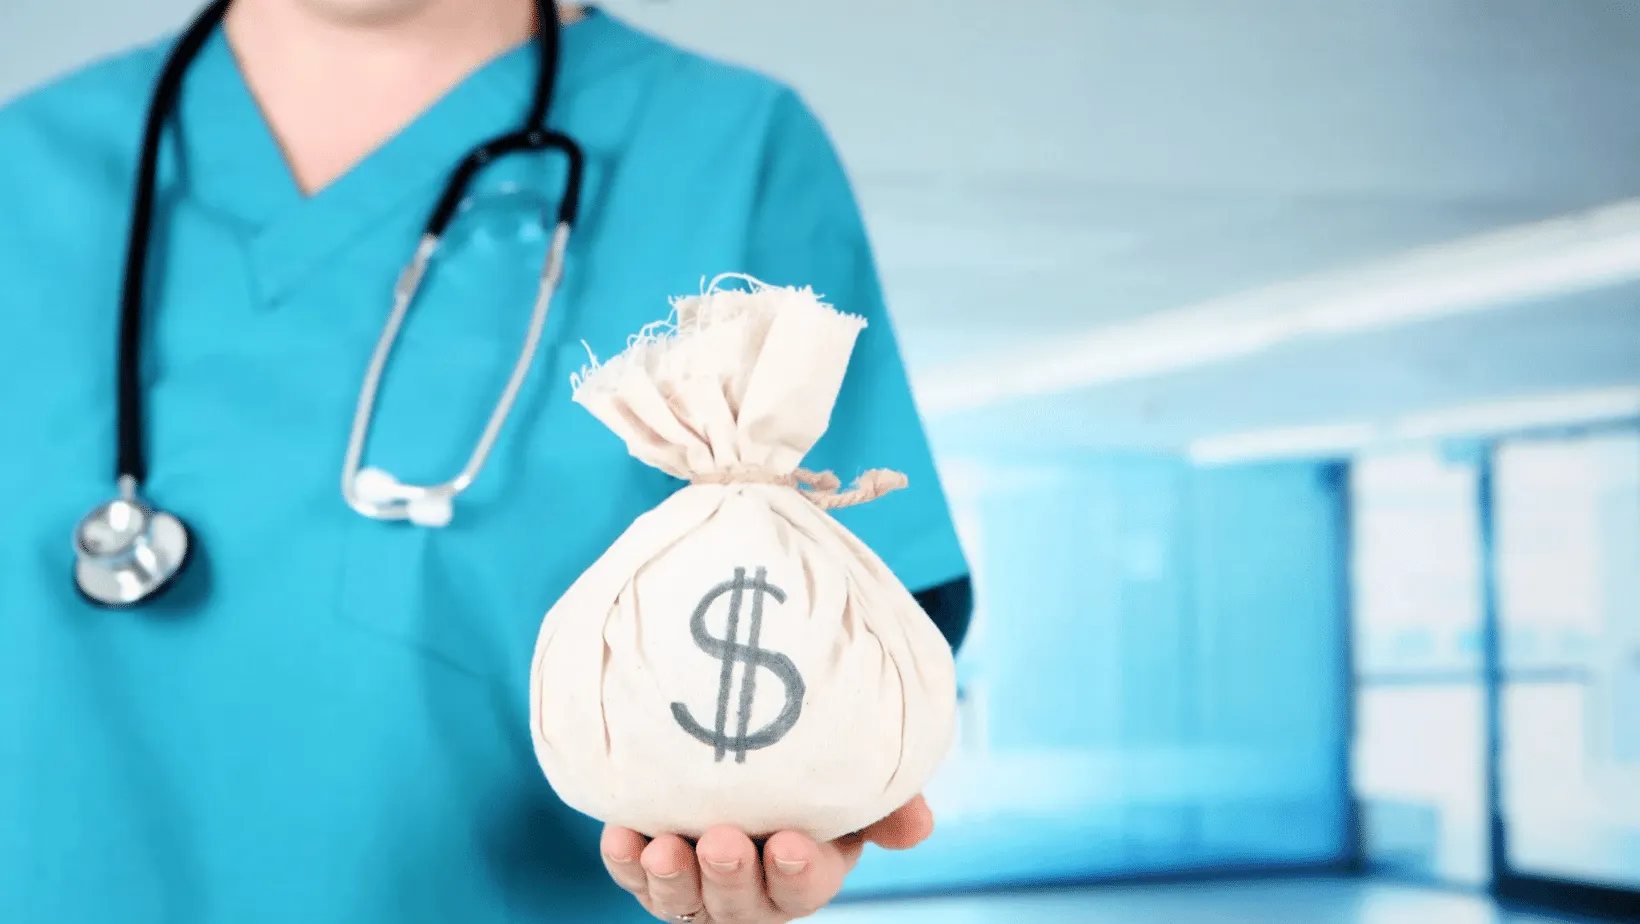 A healthcare professional in blue scrubs holding out a money bag with a dollar sign, symbolizing the financial aspects of healthcare, in a hospital corridor.